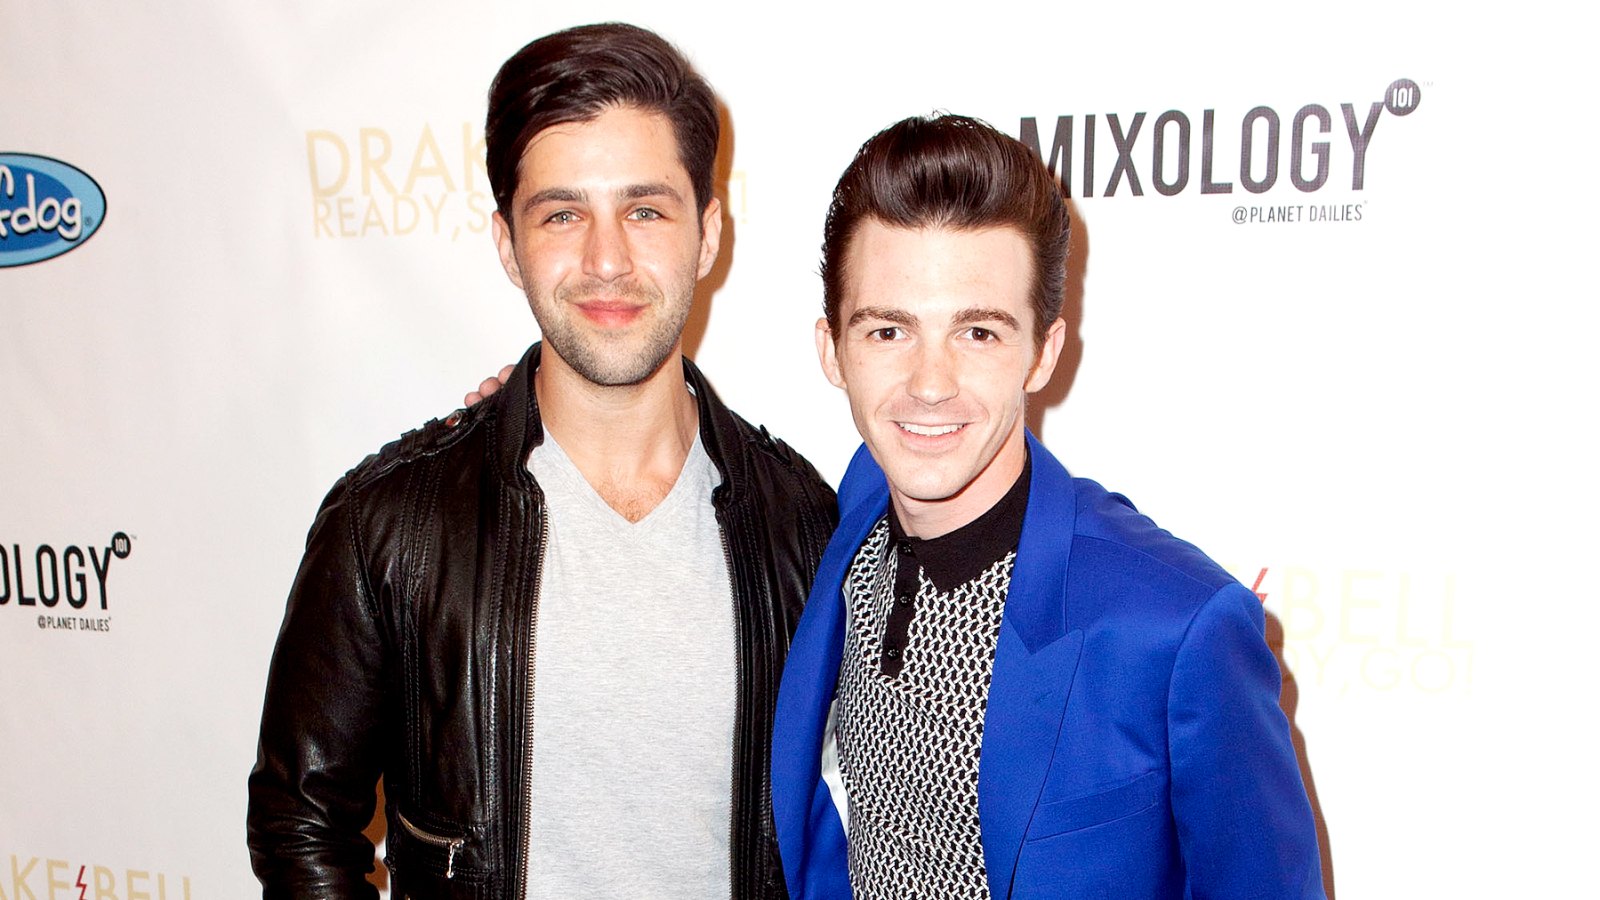 Josh Peck and Drake Bell arrive for Drake Bell's "Ready Steady Go!" Album Release Party at Mixology101 & Planet Dailies on April 17, 2014 in Los Angeles, California.